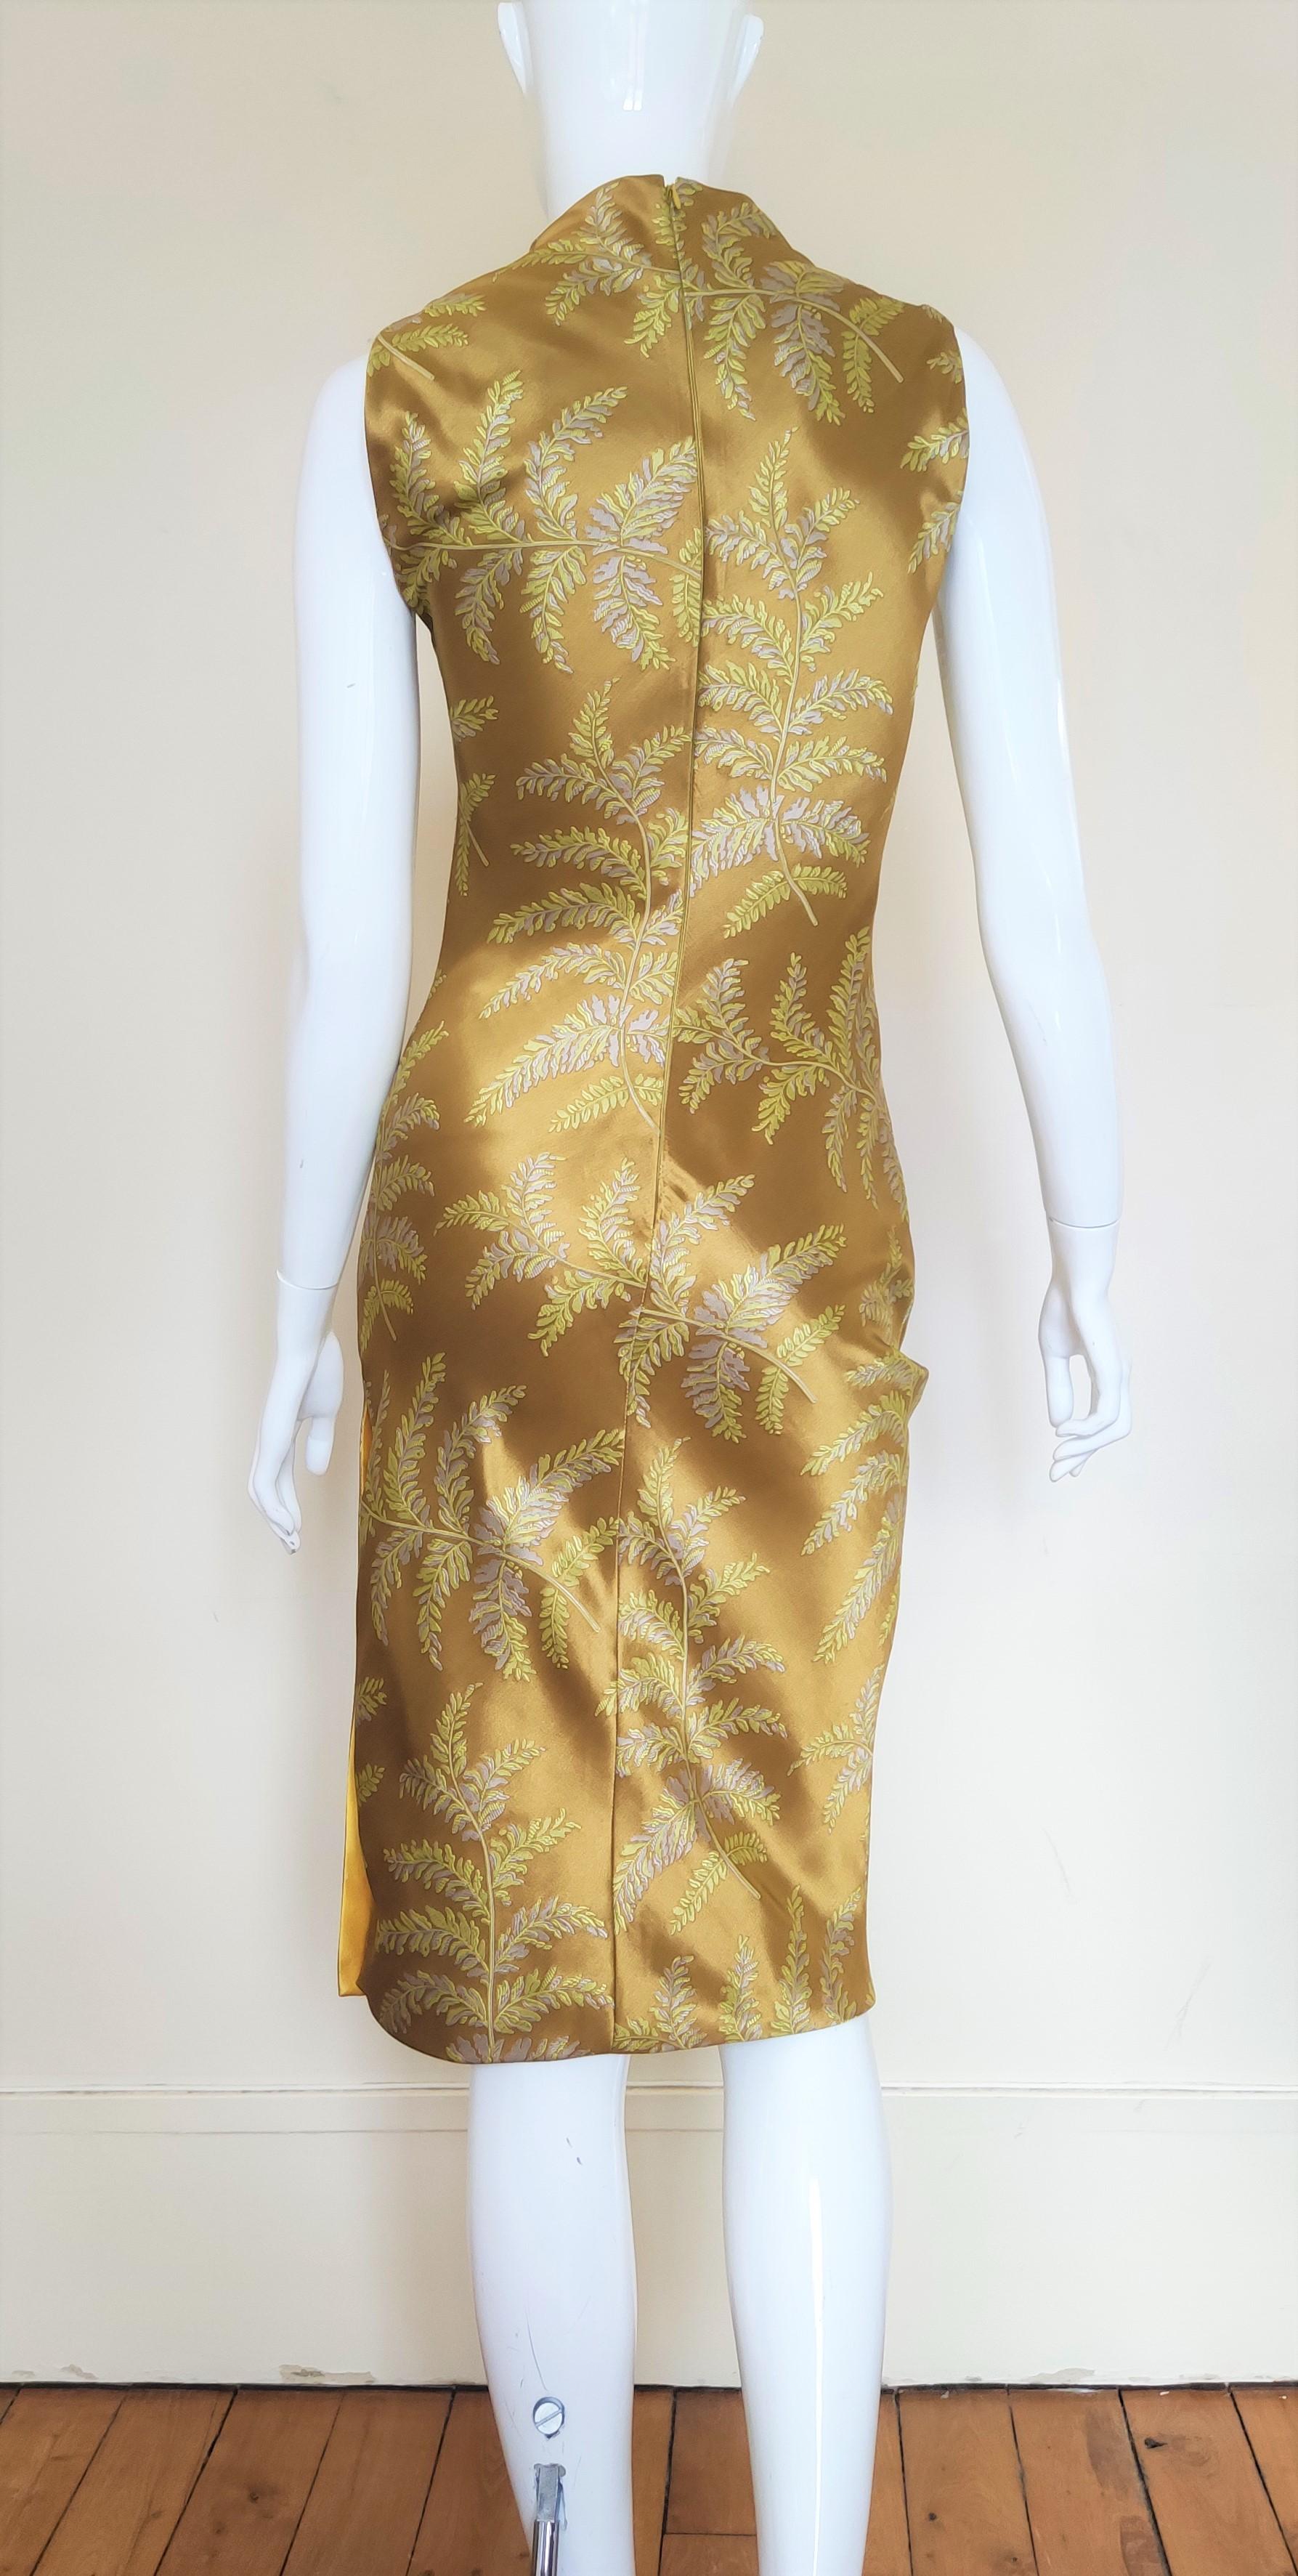 Women's Atelier Gianni Versace Silk Mustard Yellow Floral Leaf Evening Baroque Dress For Sale